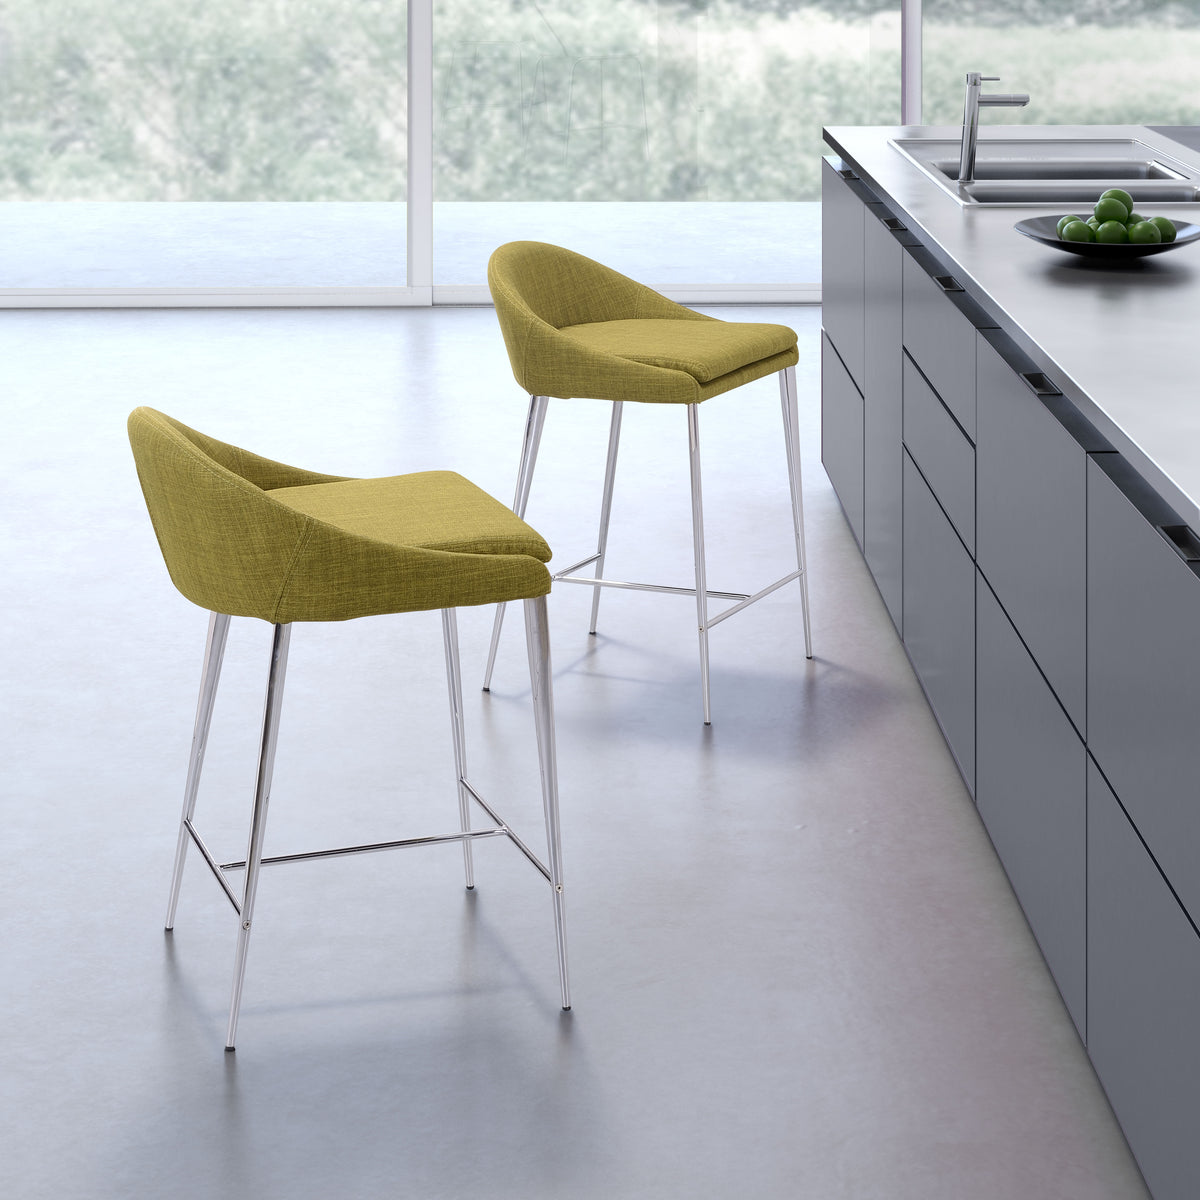 Reykjavik Counter Chair (Set of 2) Pea Green